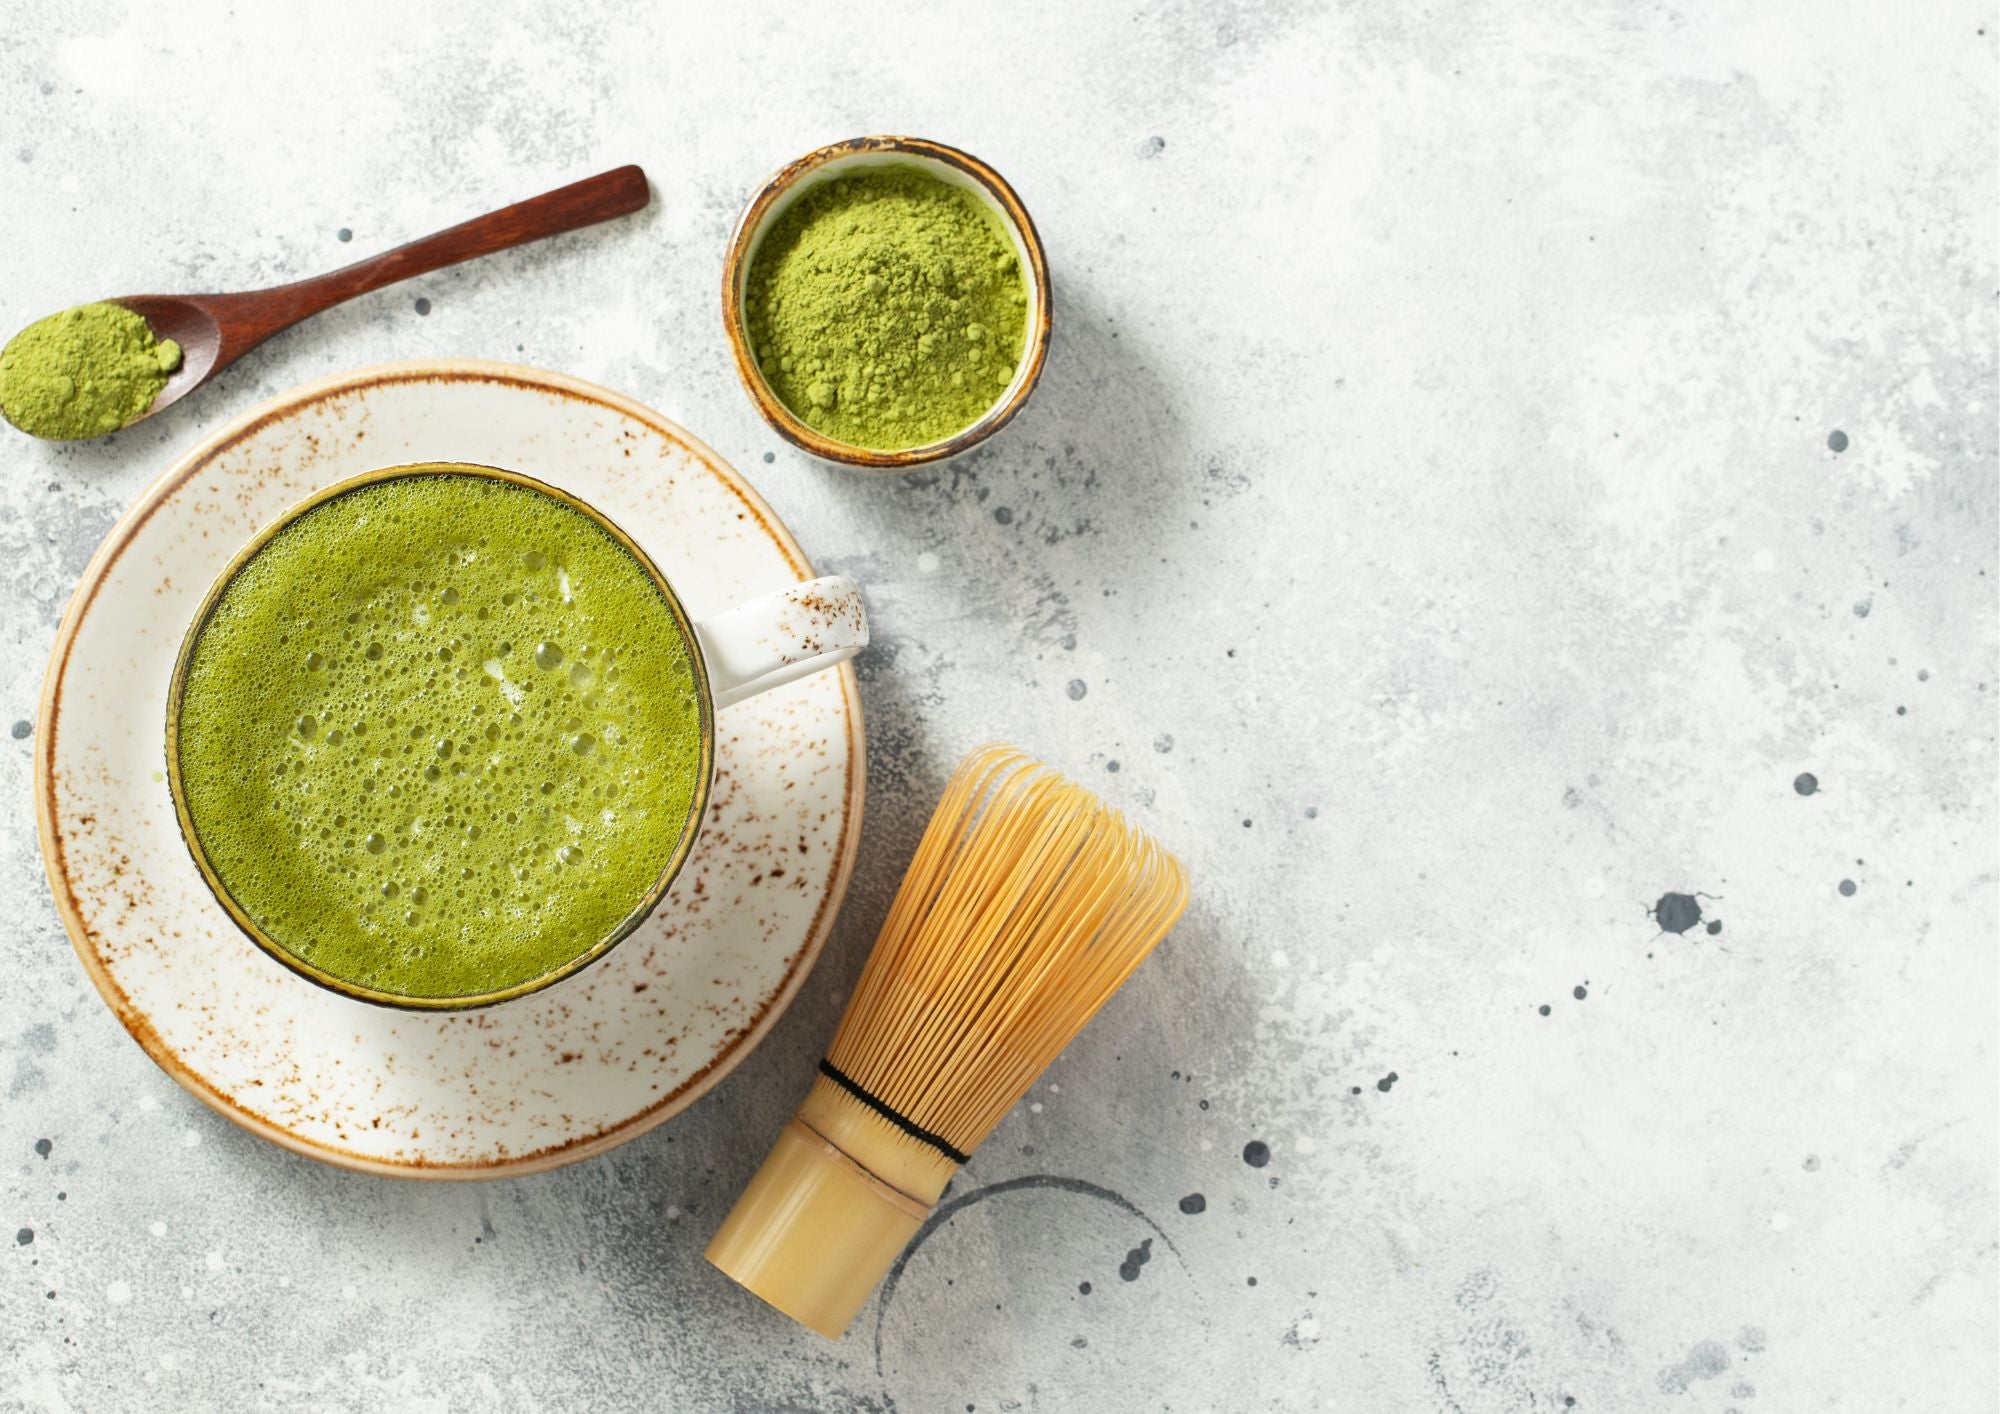 High-quality Matcha from Japan now available in the US